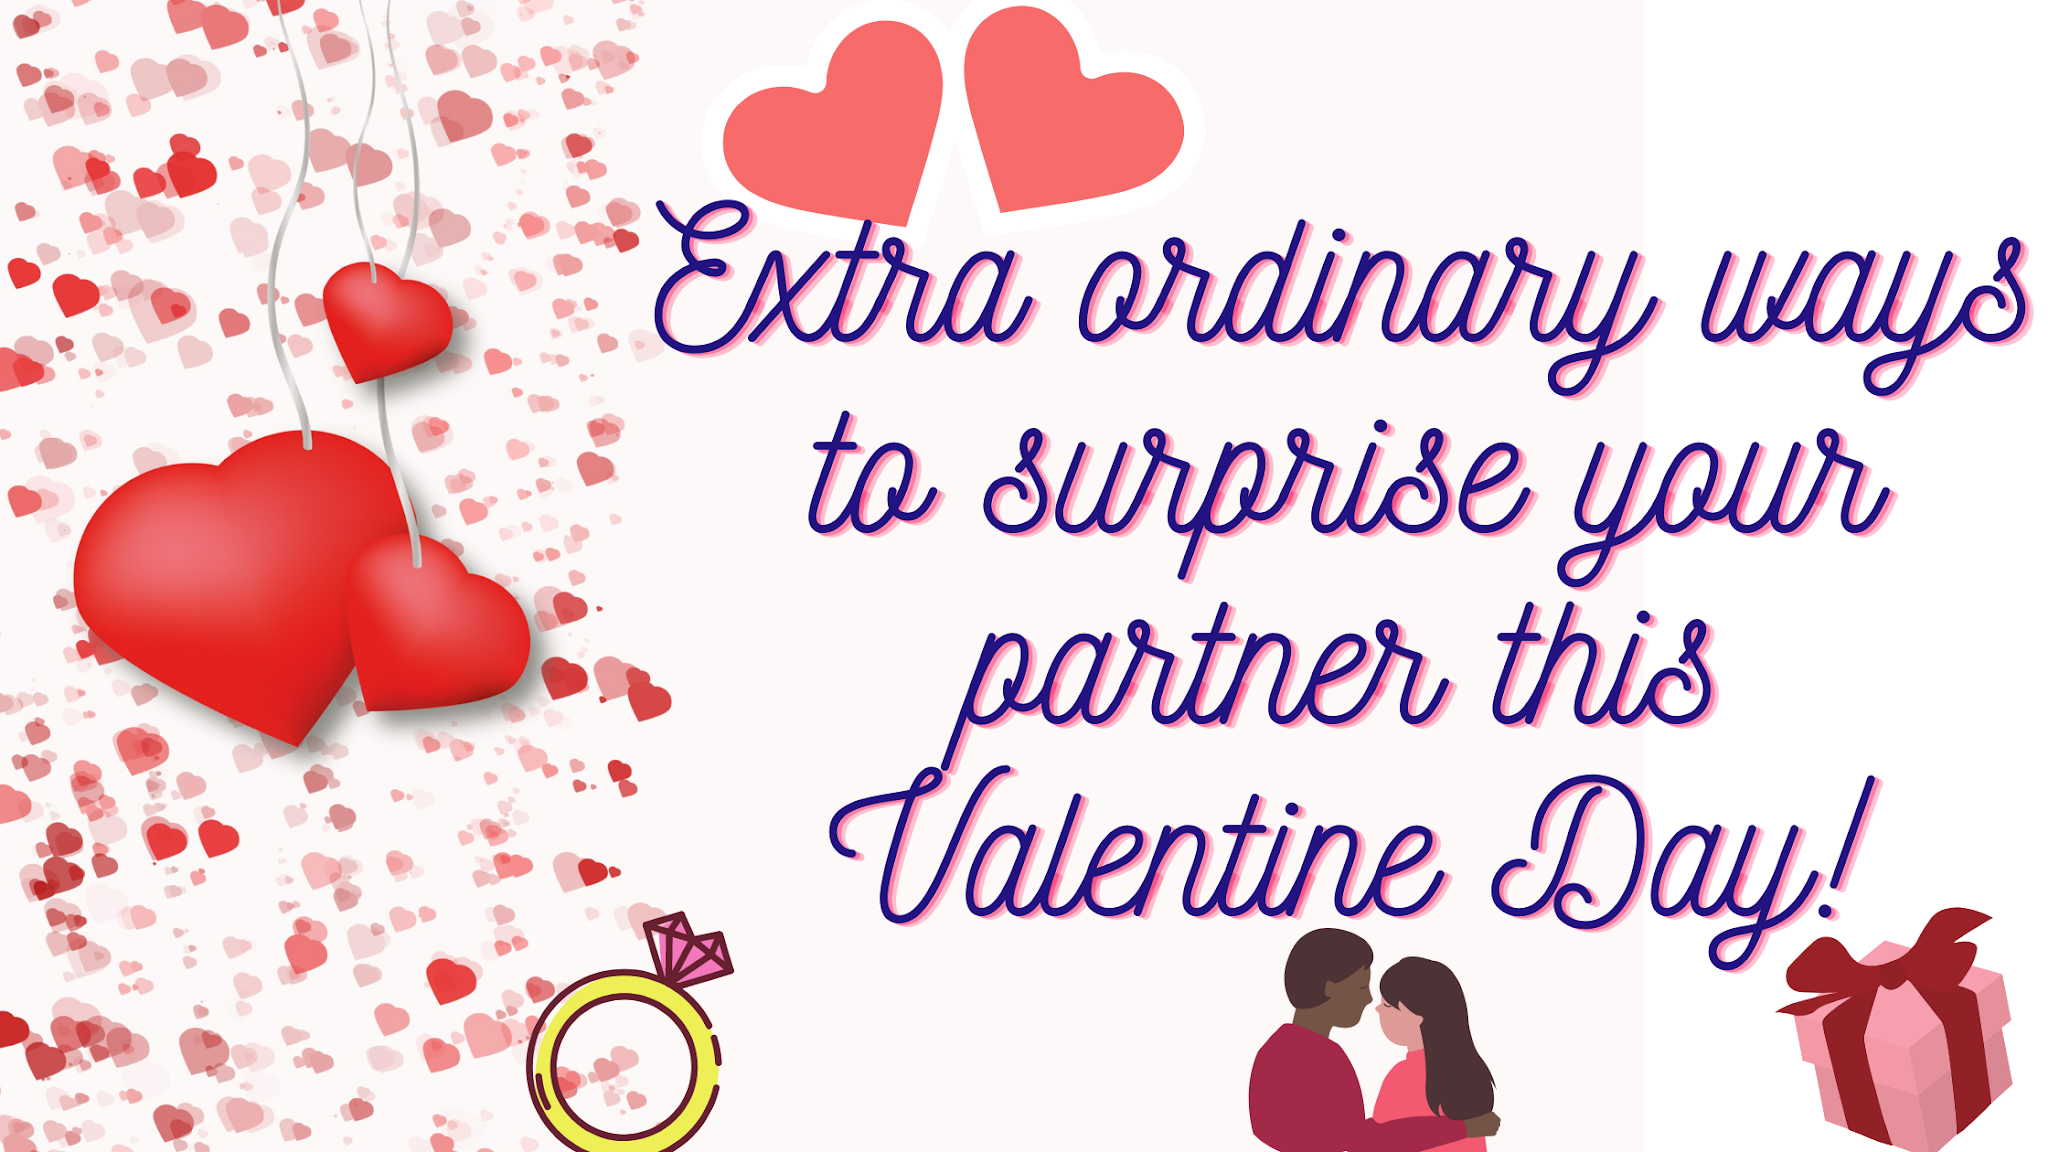 Extra ordinary ways to surprise your partner on this Valentine Day!